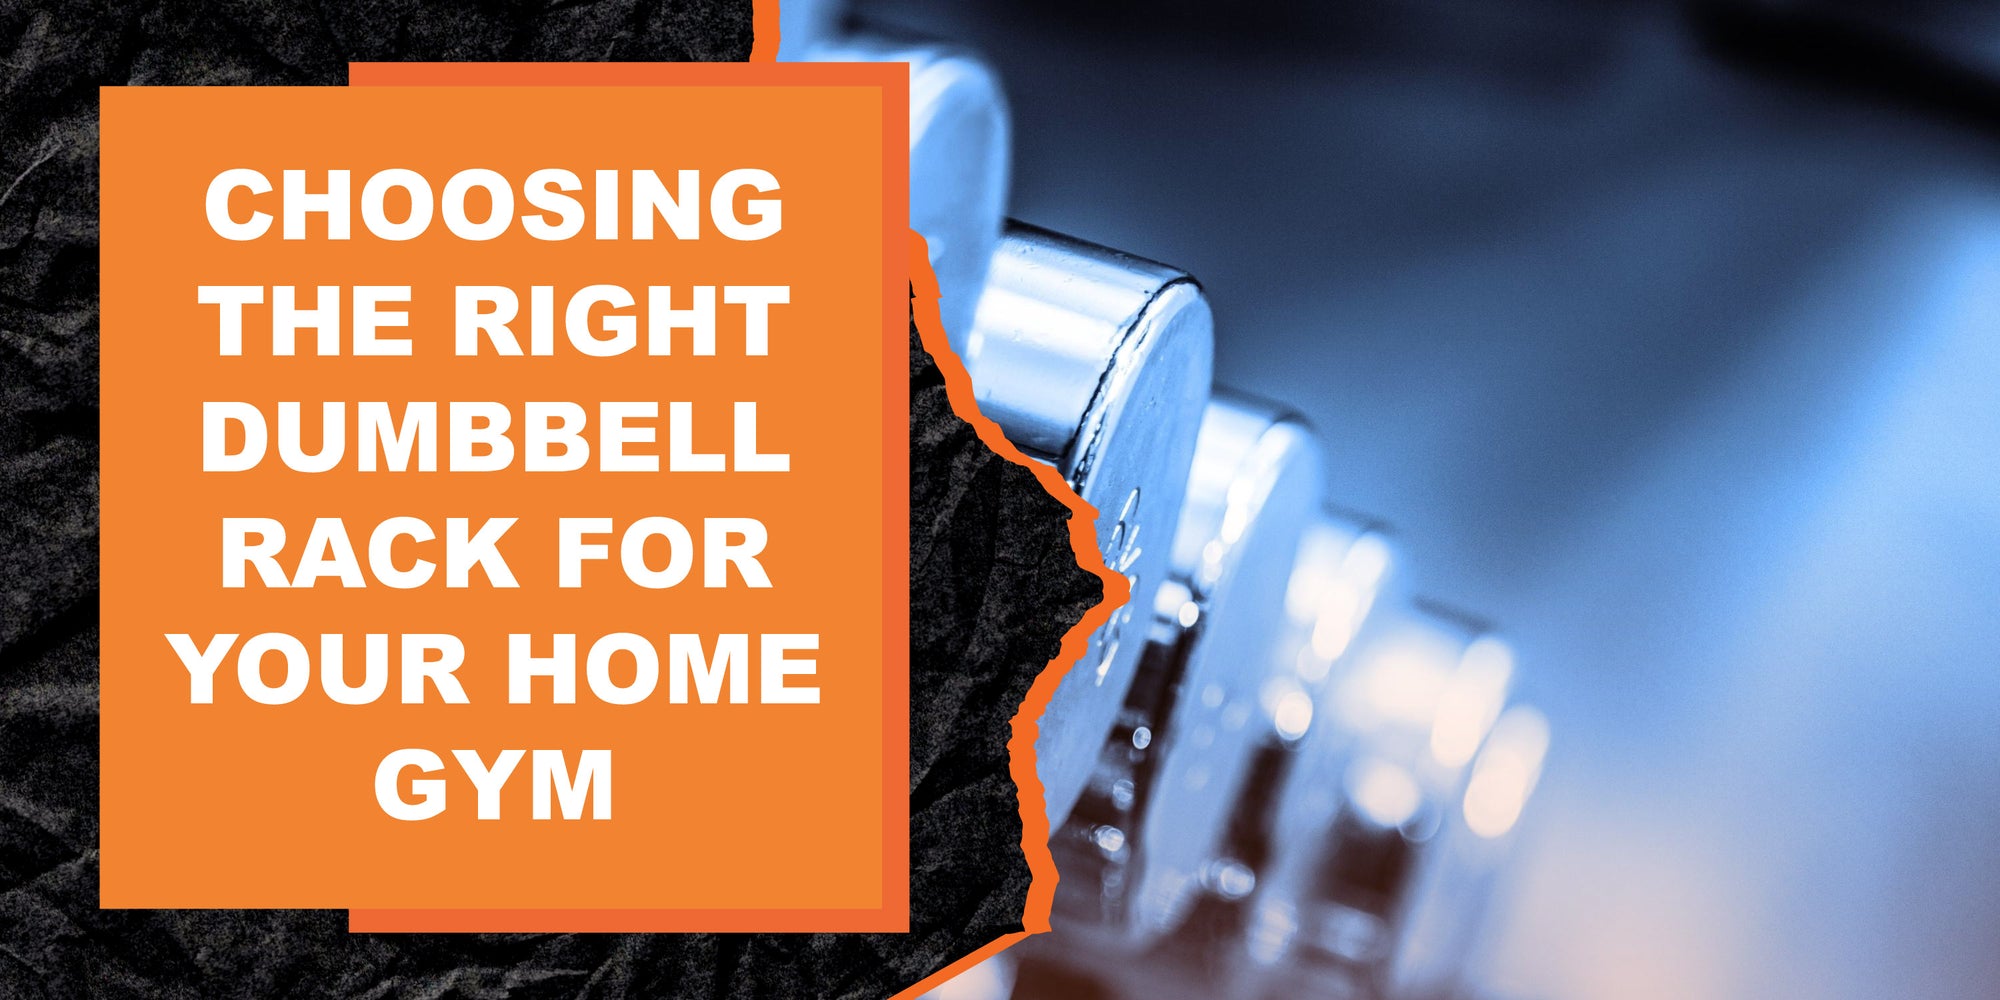 Choosing the Right Dumbbell Rack for Your Home Gym